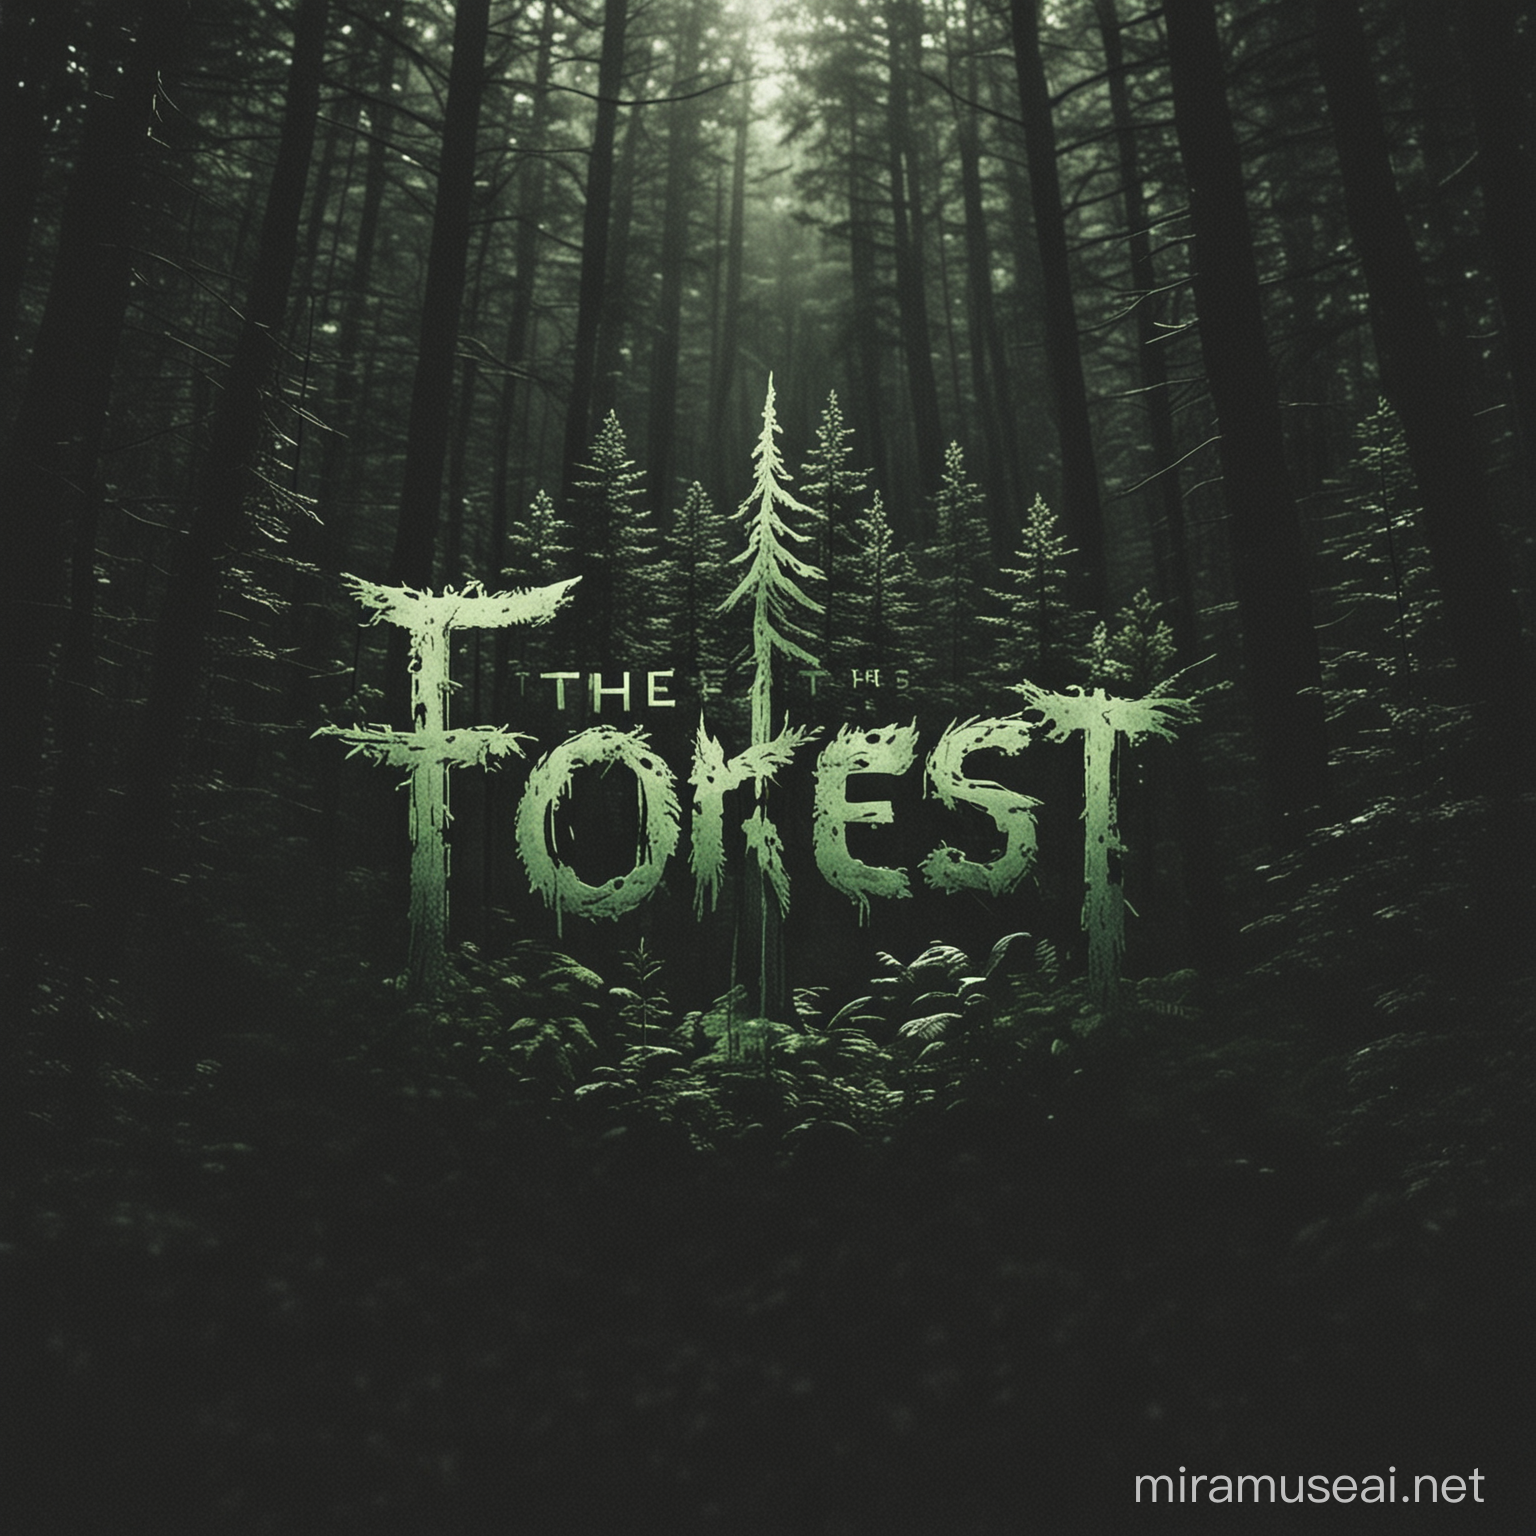 A logo name "THE FOREST"
